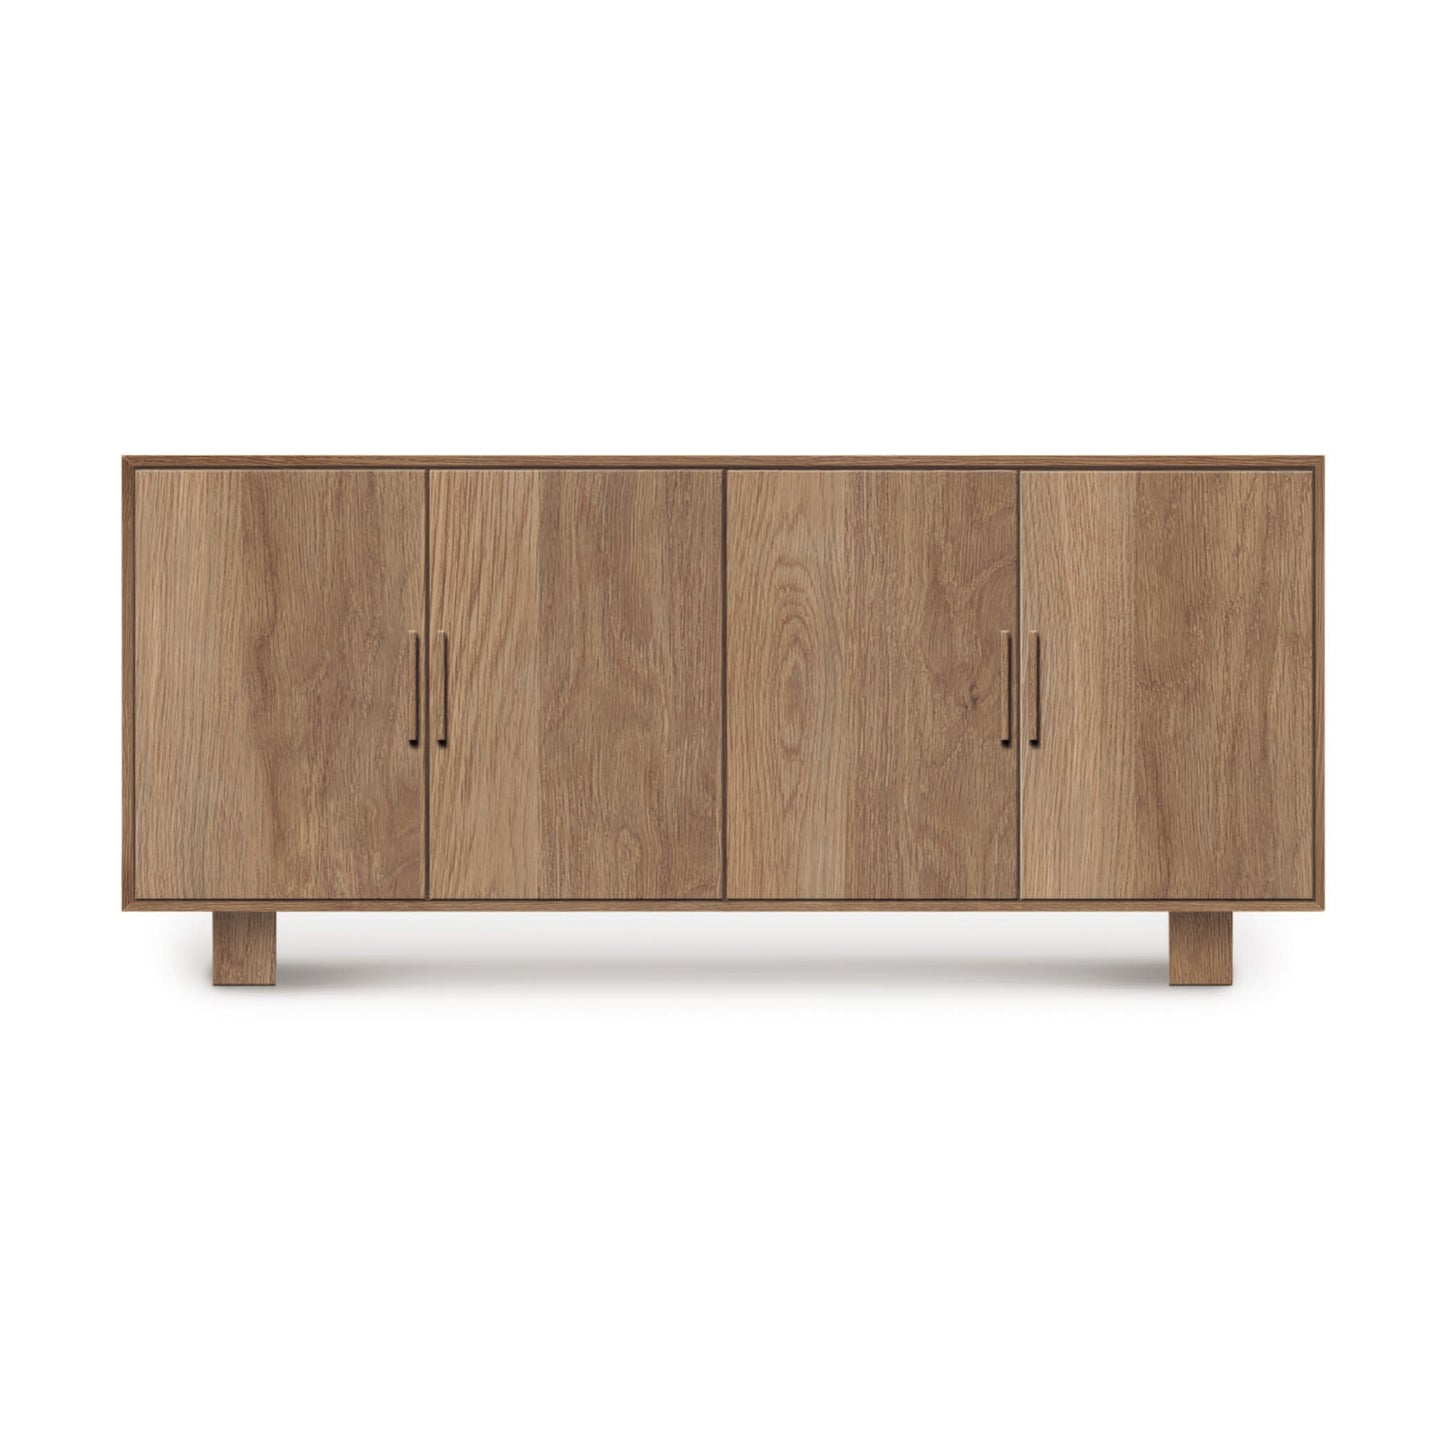 A mid-century modern Copeland Furniture Iso Oak 4-Door Buffet, made from solid hardwood oak, with short legs, isolated on a white background.